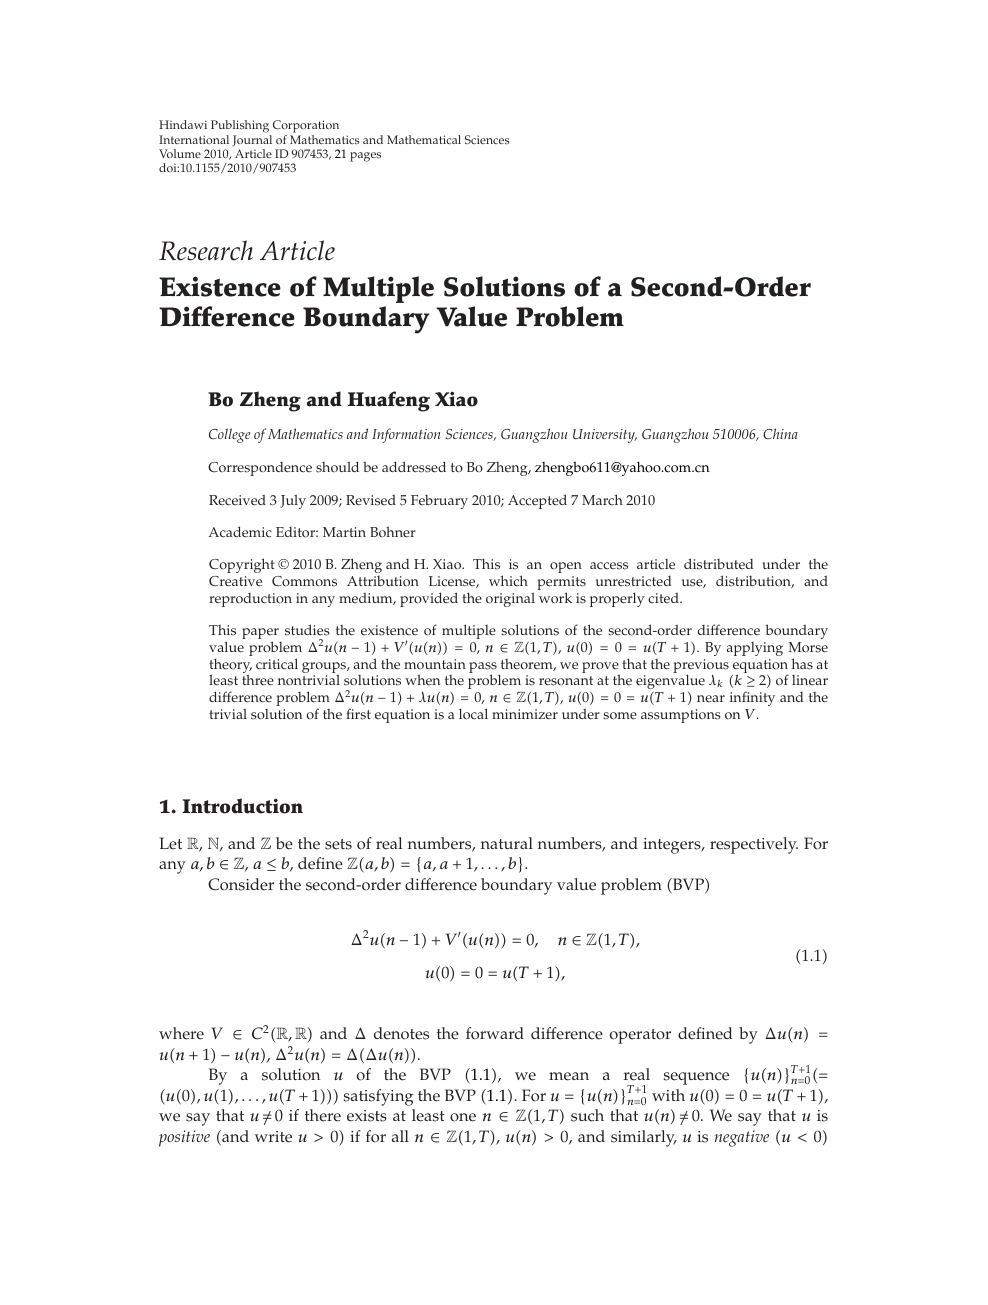 Existence Of Multiple Solutions Of A Second Order Difference Boundary Value Problem Topic Of Research Paper In Mathematics Download Scholarly Article Pdf And Read For Free On Cyberleninka Open Science Hub